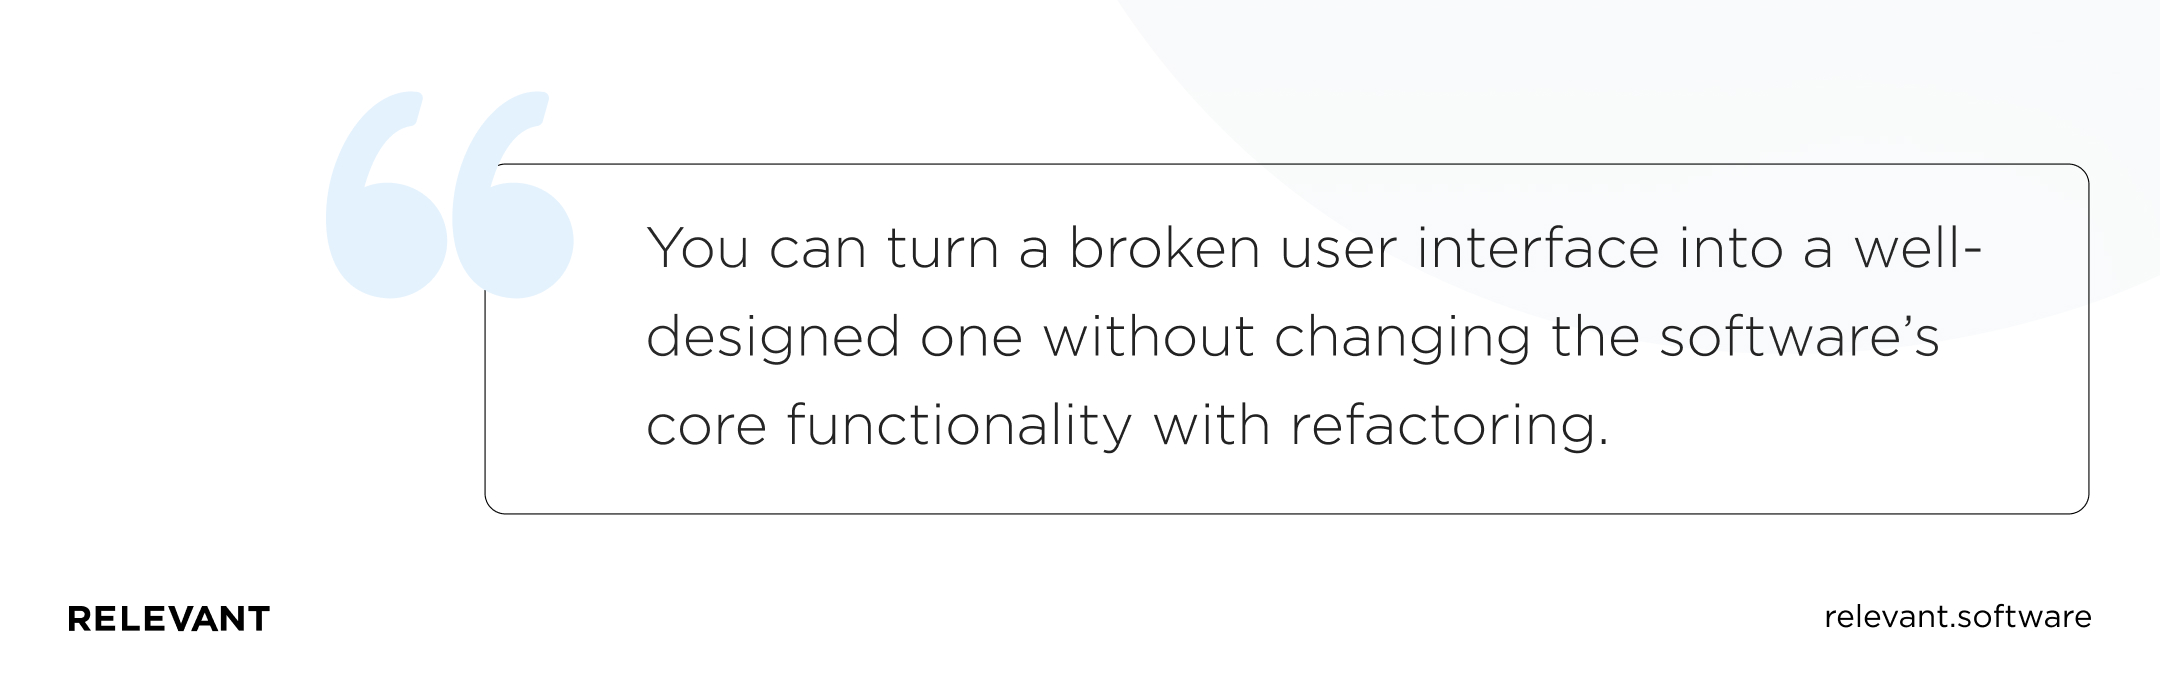 You can turn a broken user interface into a well-designed one without changing the software’s core functionality with refactoring.